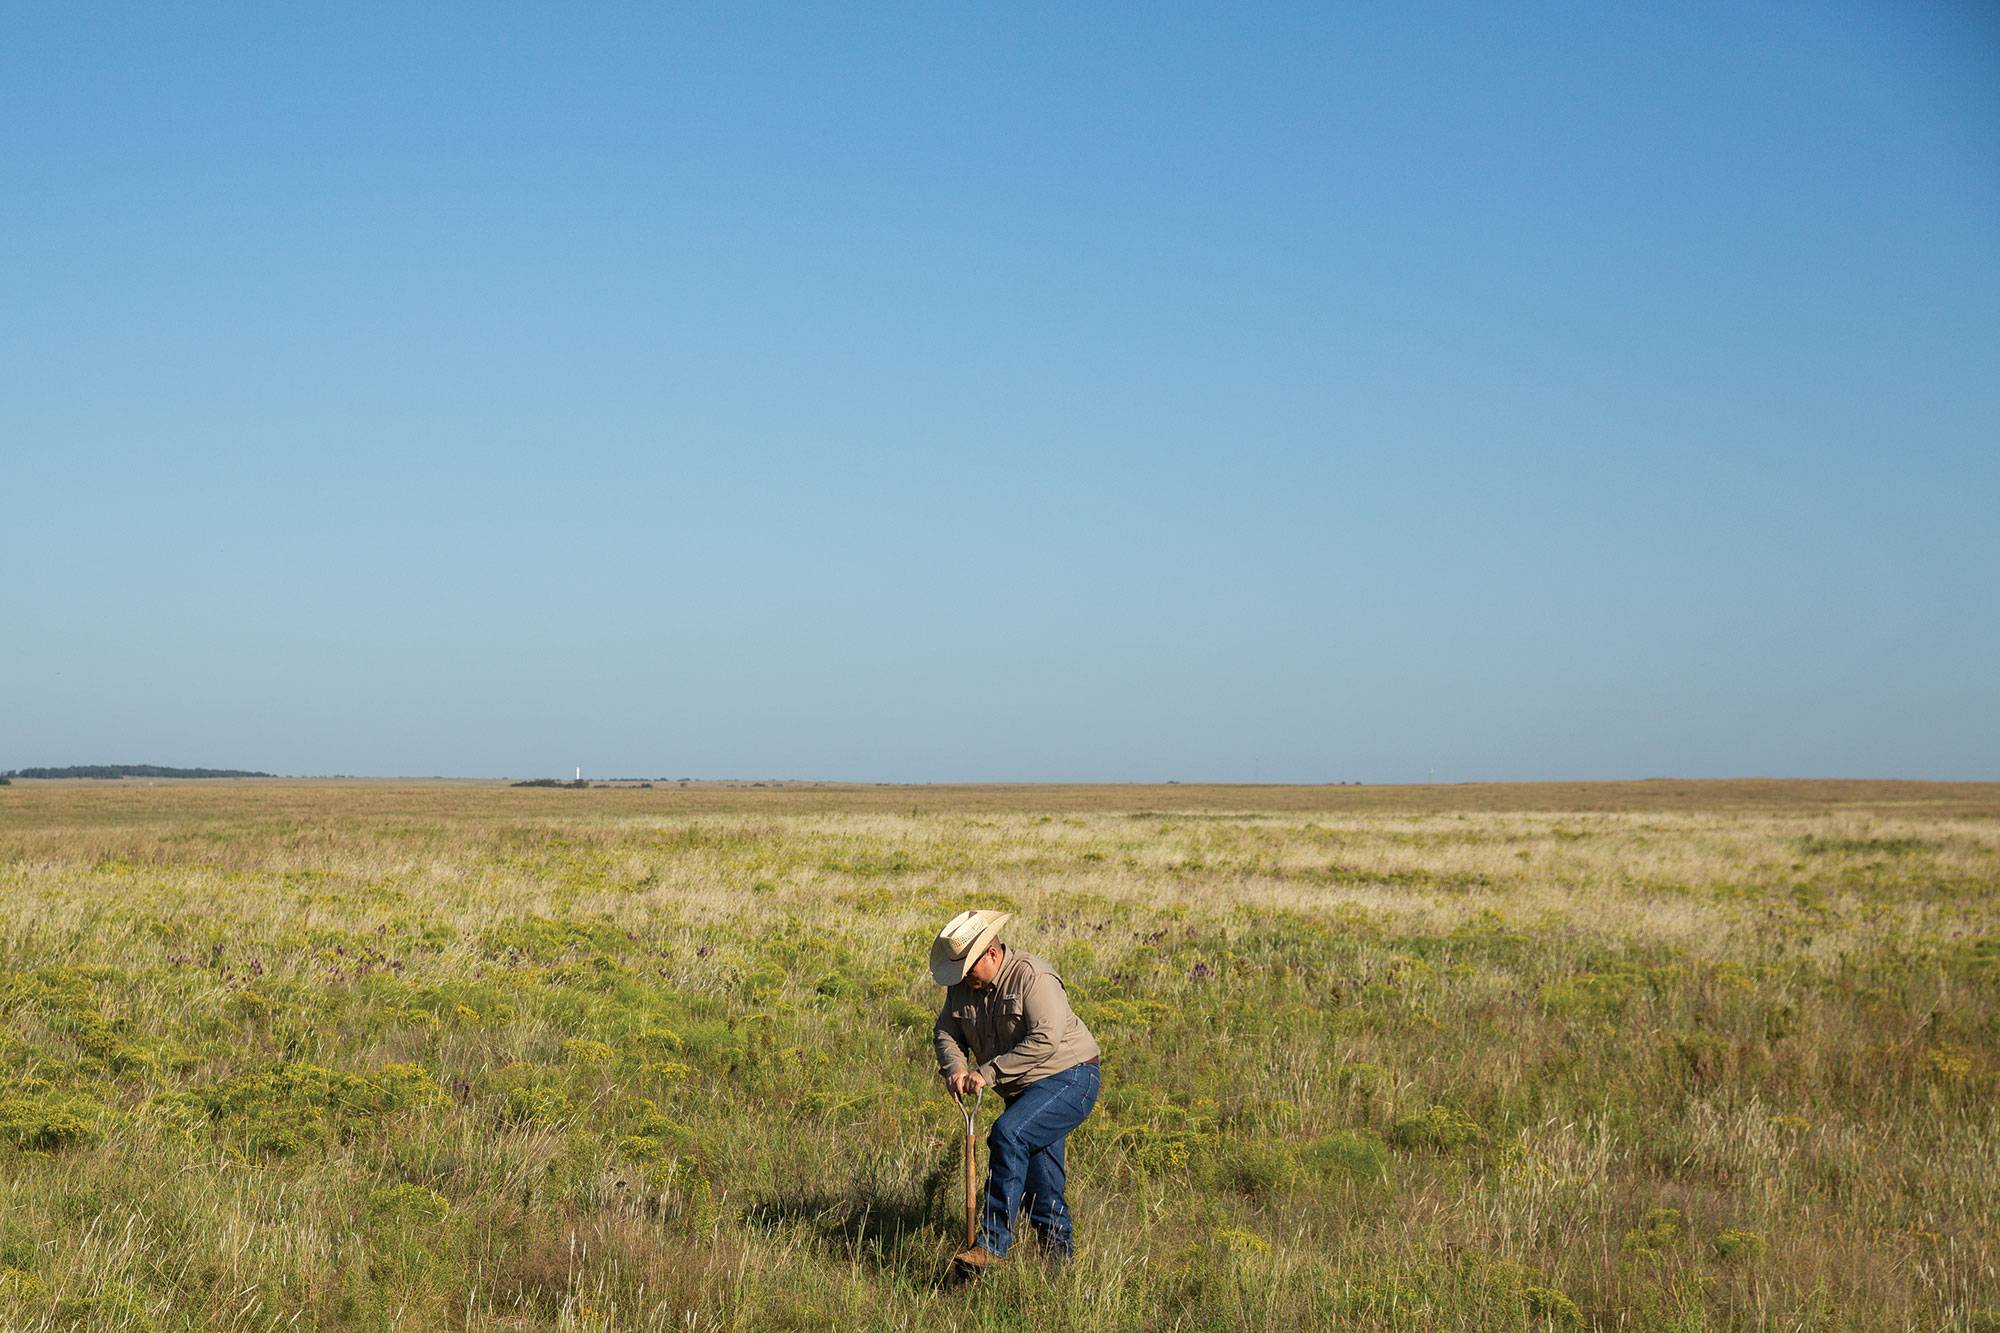 Jeff Goodwin digs in pasture for soil samples